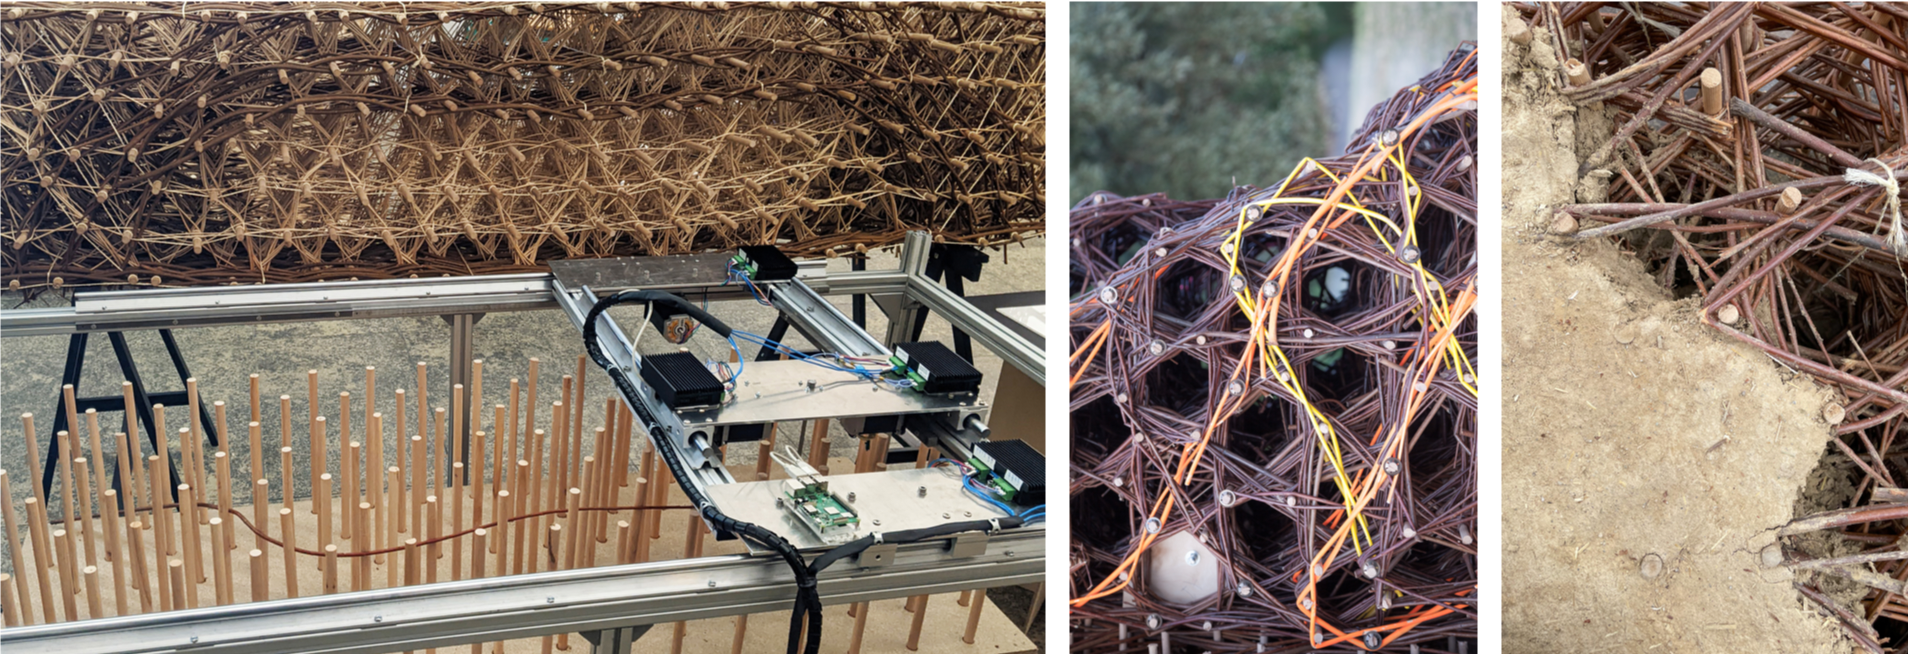 The photograph on the left shows a machine sliding over a plate of vertical rods and braiding a strand of willow. A larger braided component can be seen in the background. The photograph in the centre shows a close-up of the braid, and the right photograph shows the braid partially filled with clay.